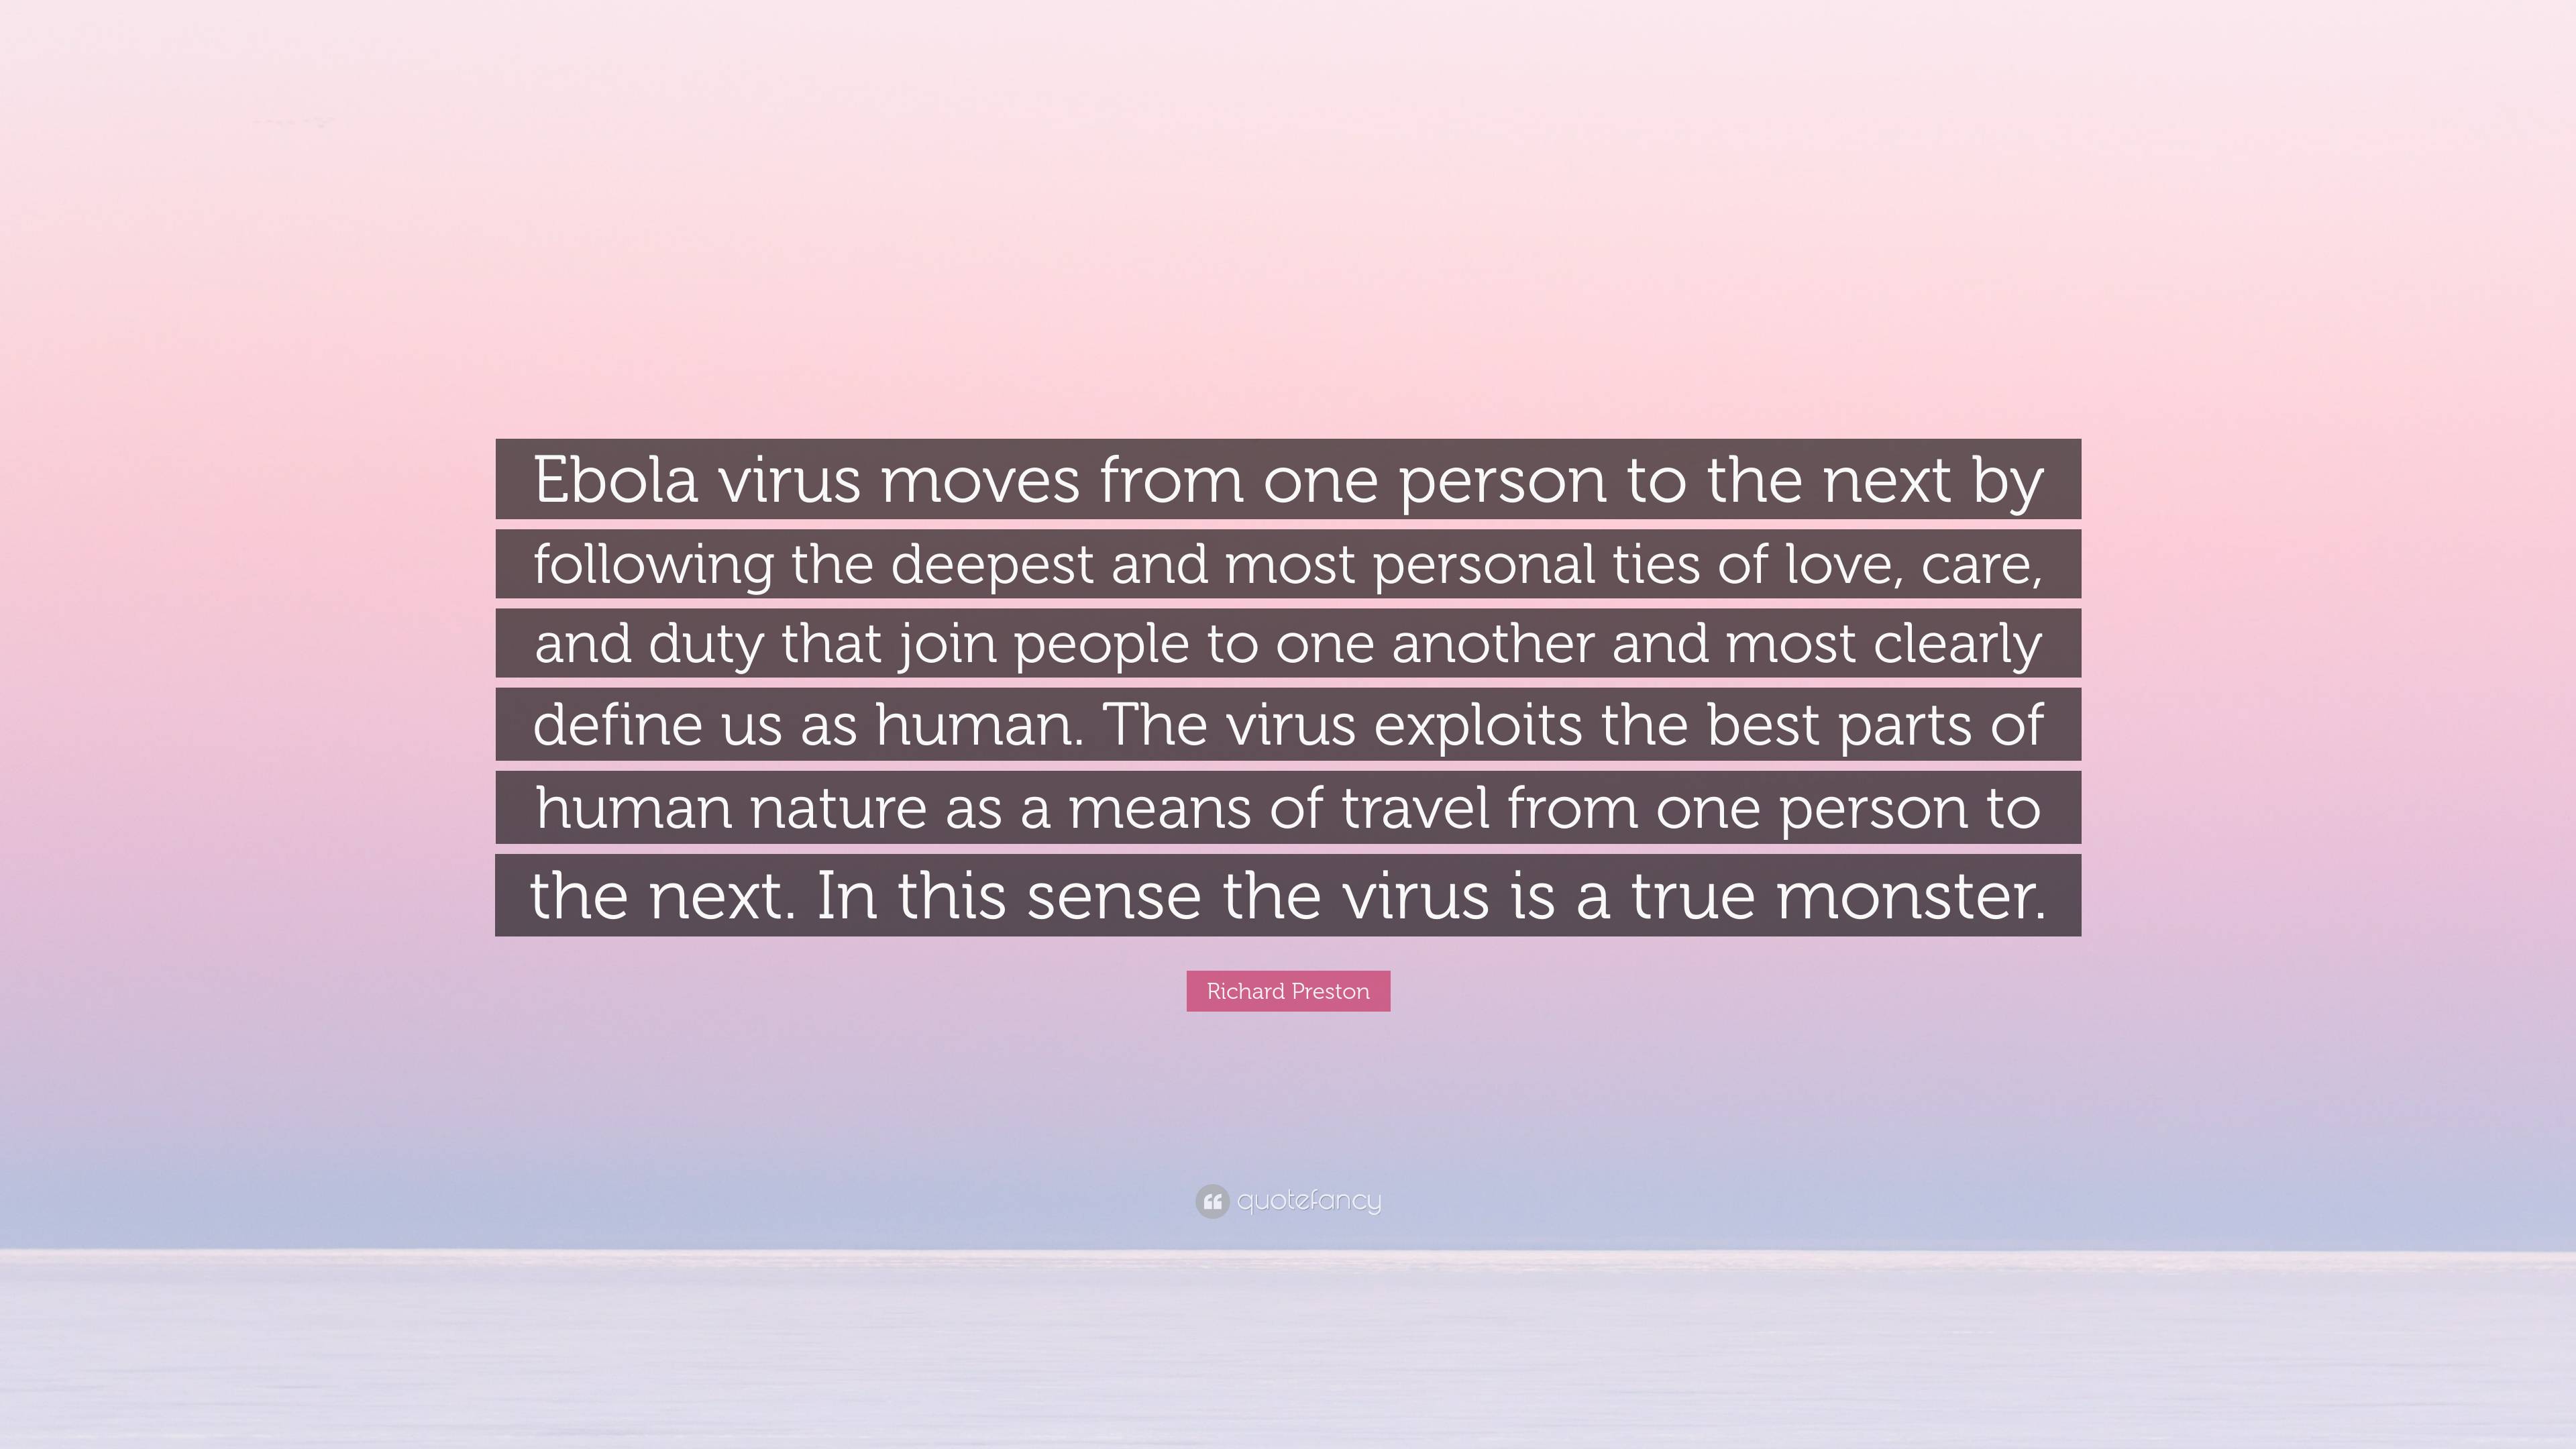 Richard Preston Quote: “Ebola virus moves from one person to the next by  following the deepest and most personal ties of love, care, and duty th...”